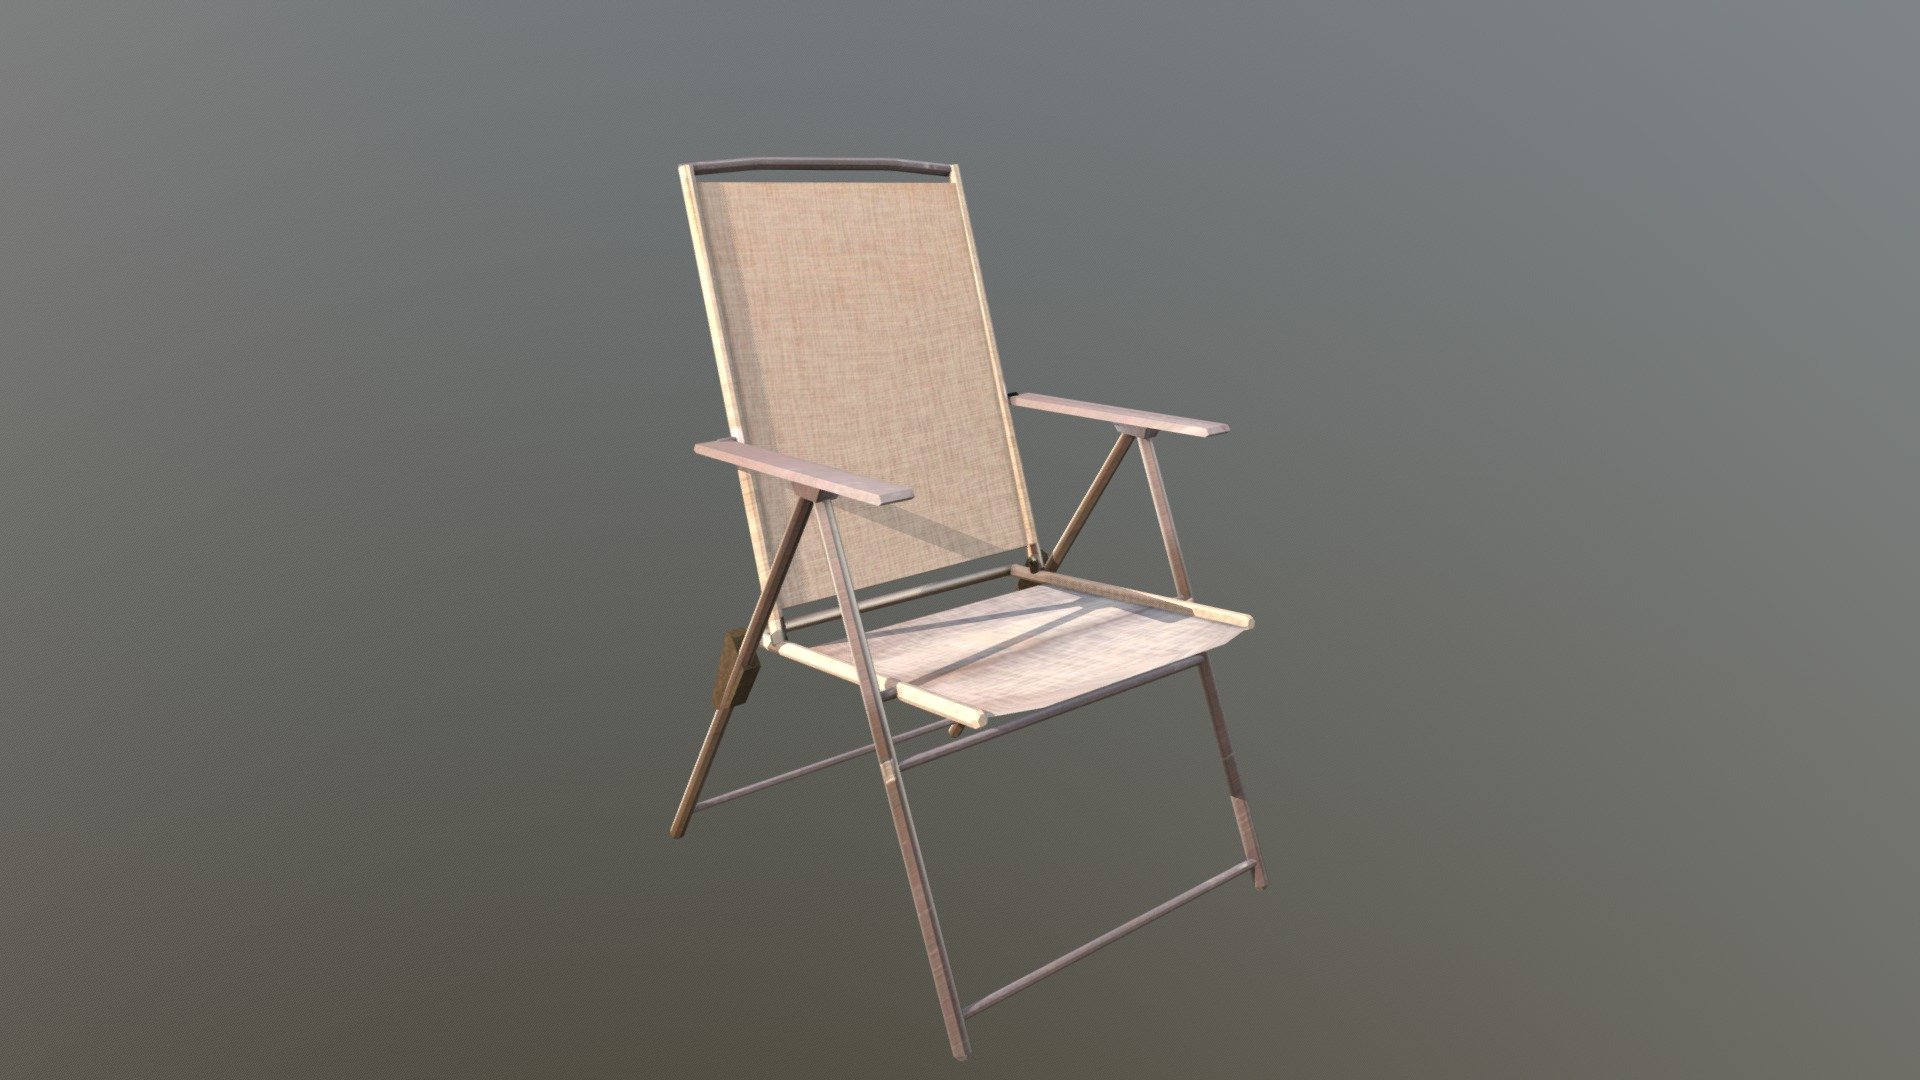 A patio chair from my backyard, reconstructed manually from a single photo using Blender and the BLAM plugin 3d model